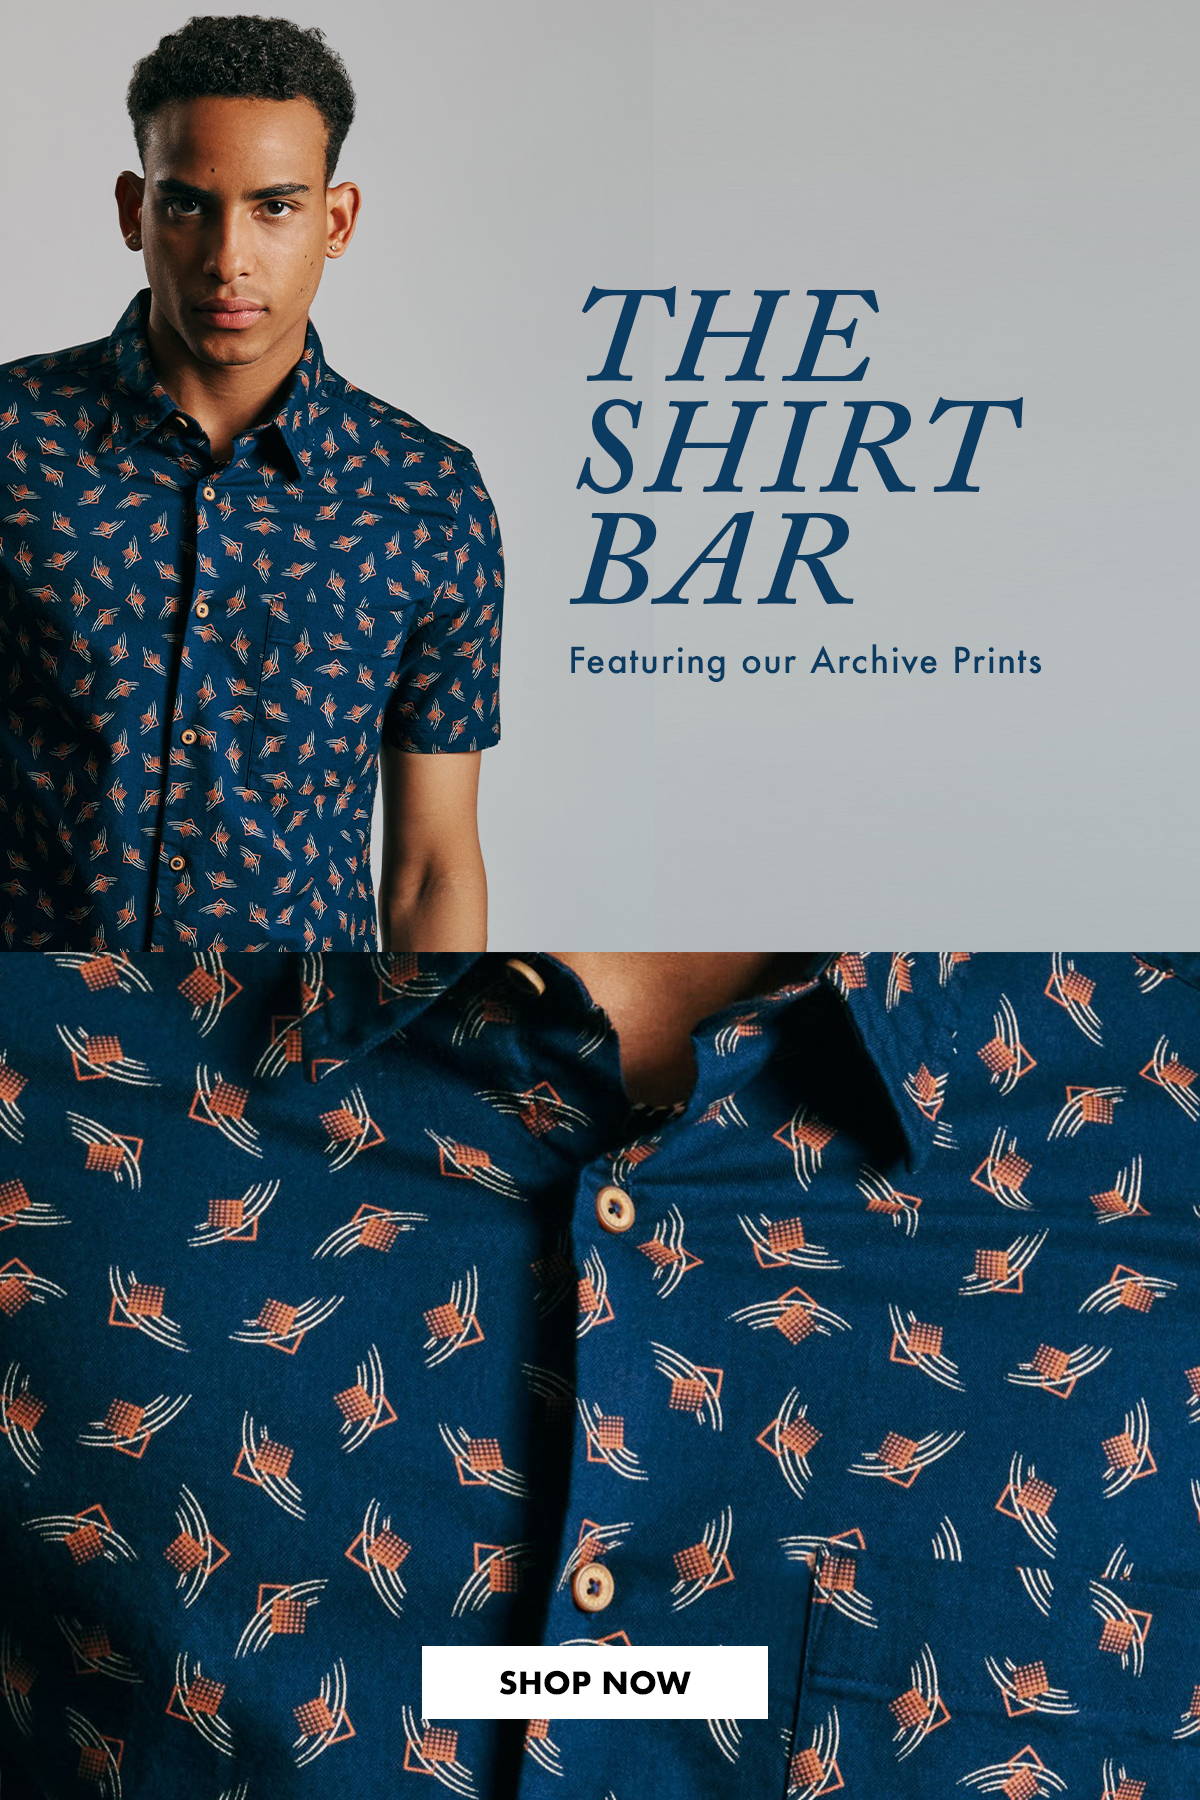 THE SHIRT BAR FEATURING OUR ARCHIVE PRINTS, SHOP NOW>